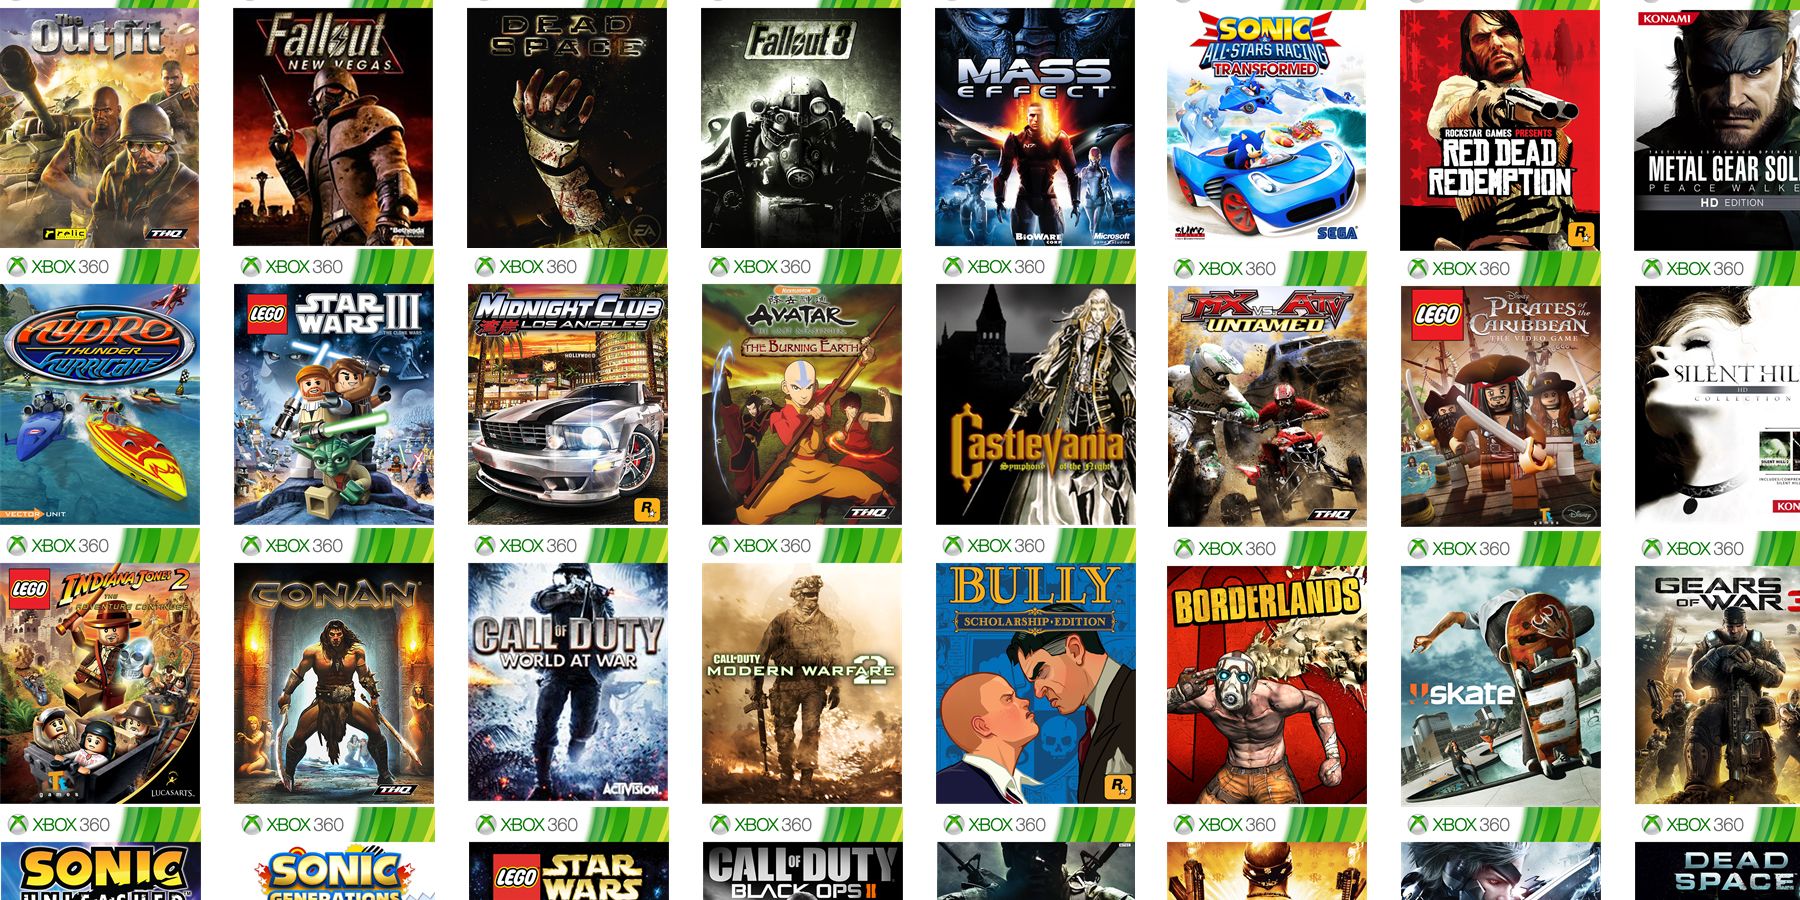 Xbox Live Marketplace brand is dead -- Xbox Games Store takes its place